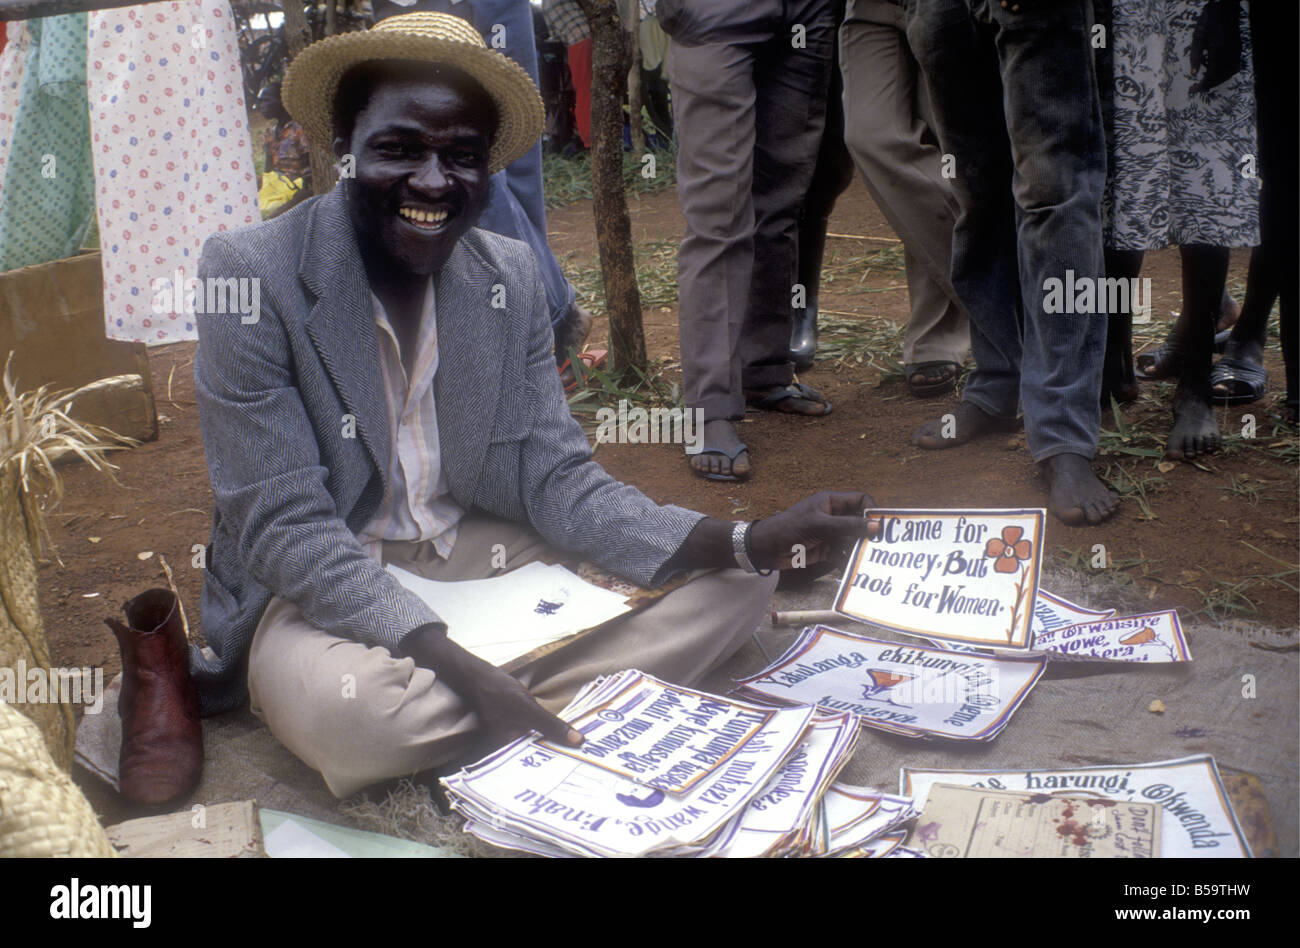 Black African man market trader selling offering for sale mottoes and local sayings at rural market in Uganda Stock Photo